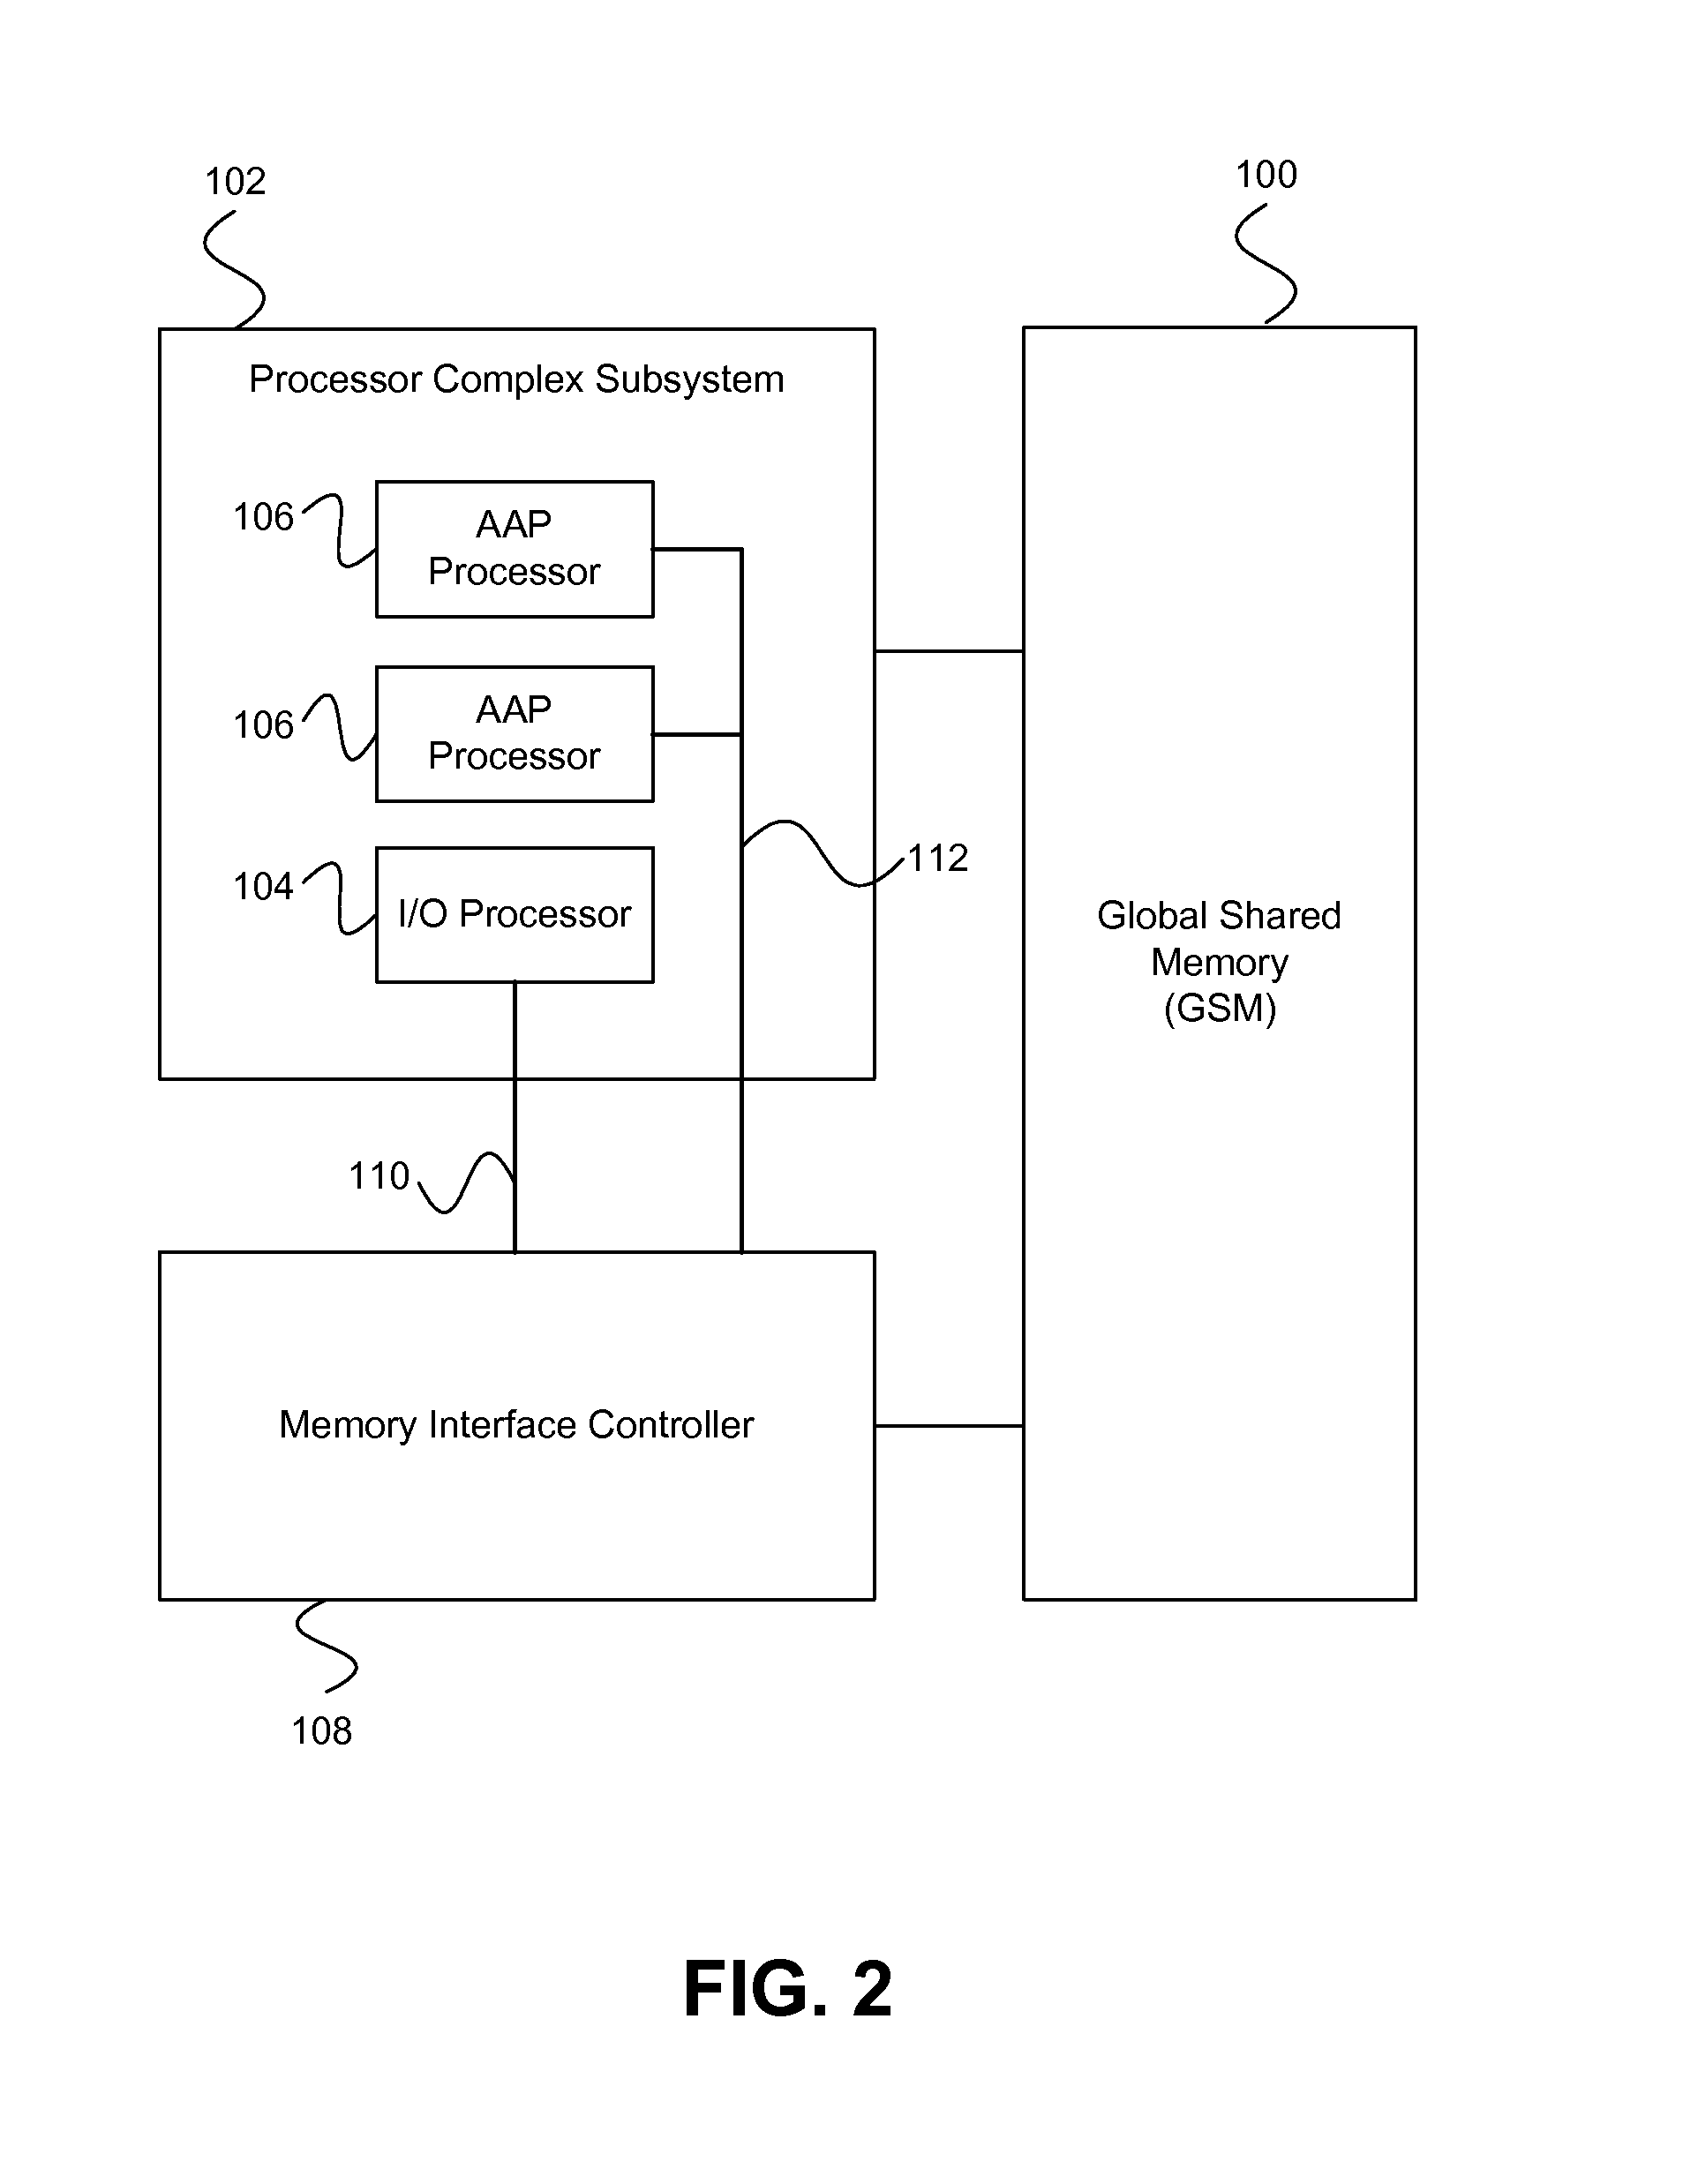 On-chip shared memory based device architecture